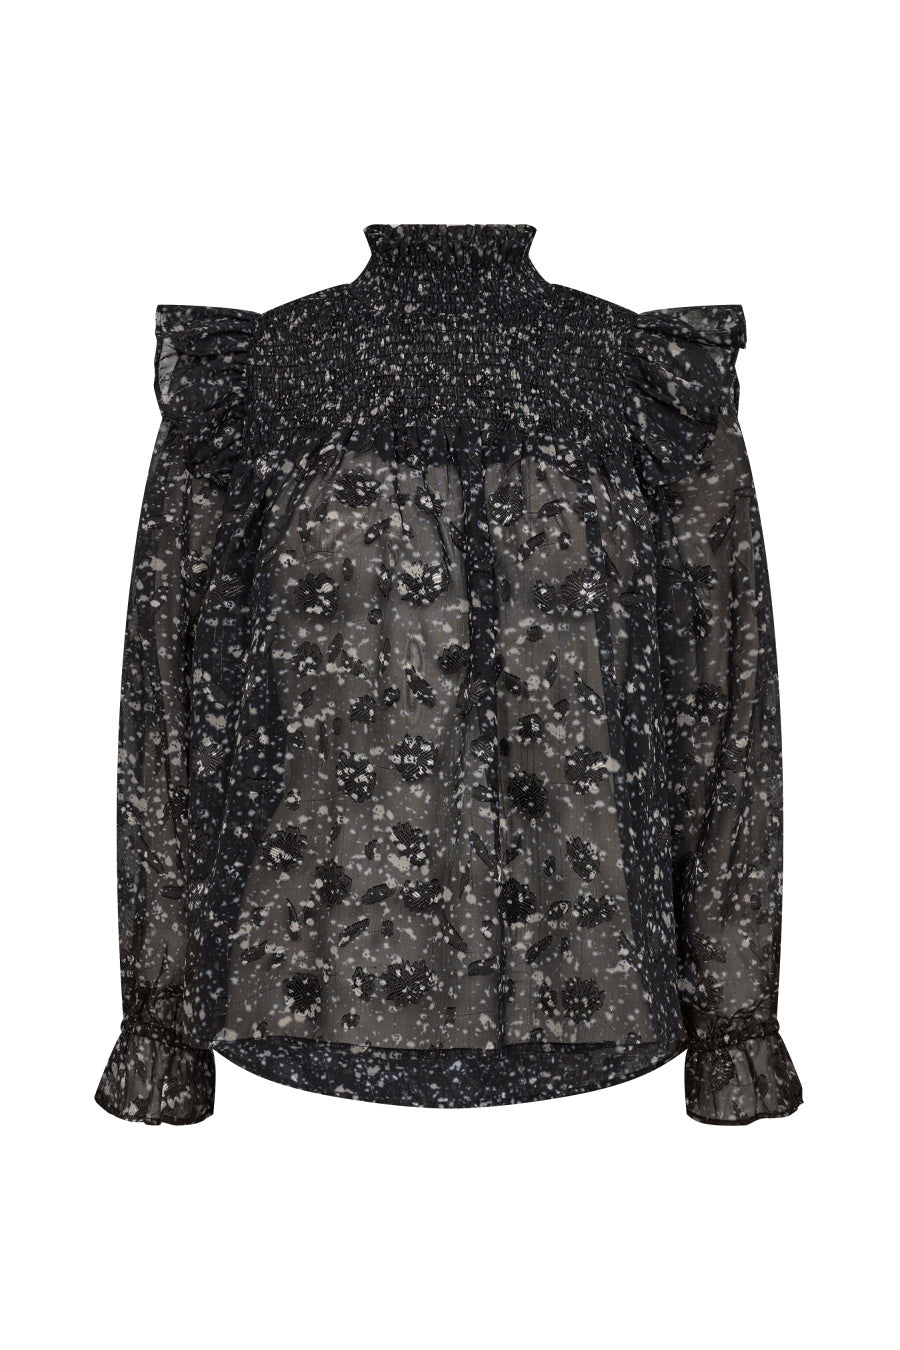 Co'Couture Snowdrift Smock Blouse - Black - RUM Amsterdam